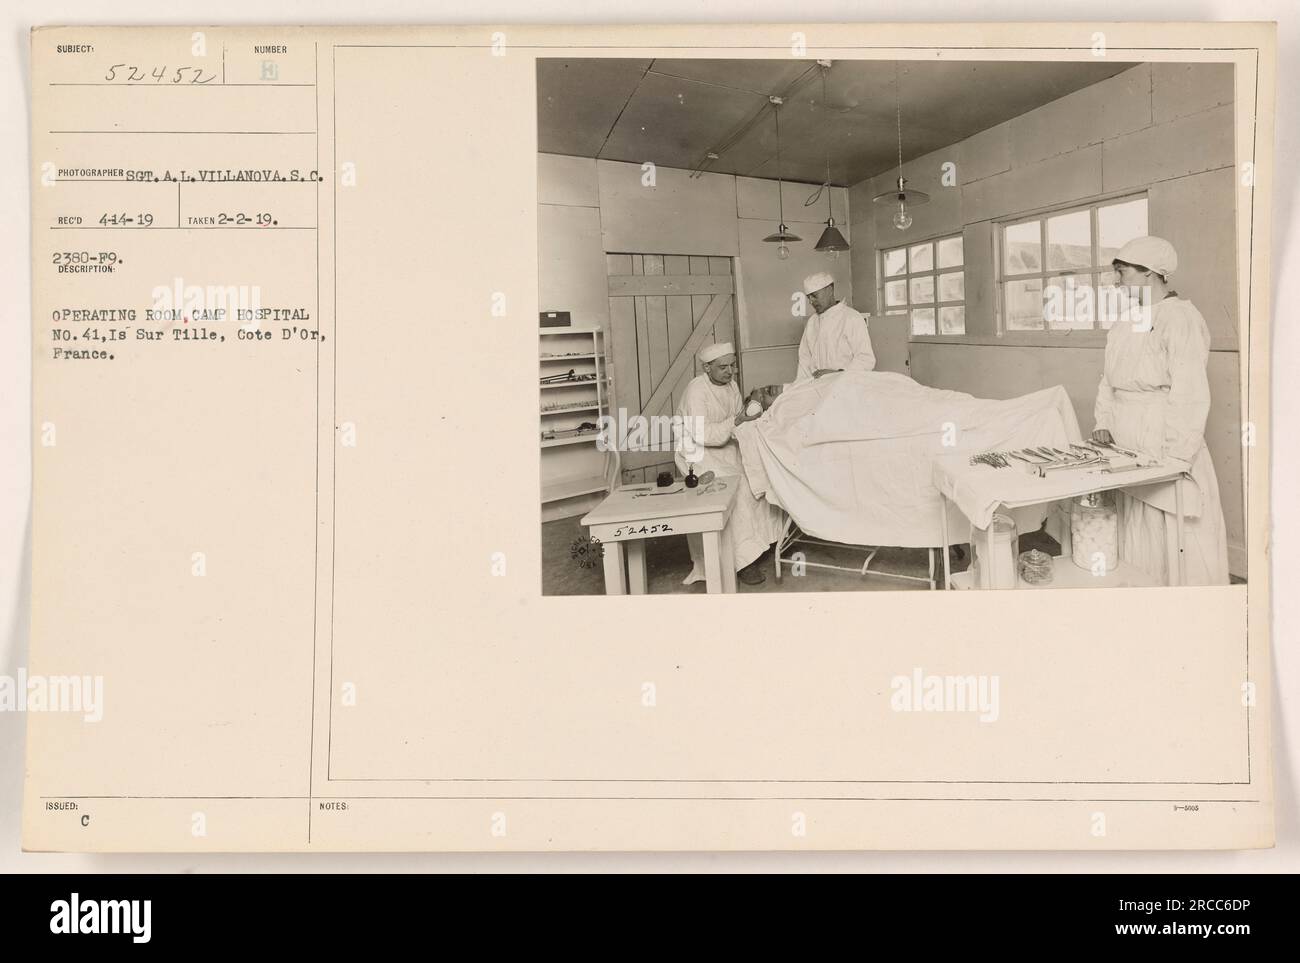 A photograph taken in 1919 shows the operating room at Camp Hospital No. 41 in Is Sur D'Or, France. The photo was taken by Sot. A. L. Villanova, and the description states that it is an issued operating room at the hospital. The accompanying notes reference the subject as 52452. Stock Photo